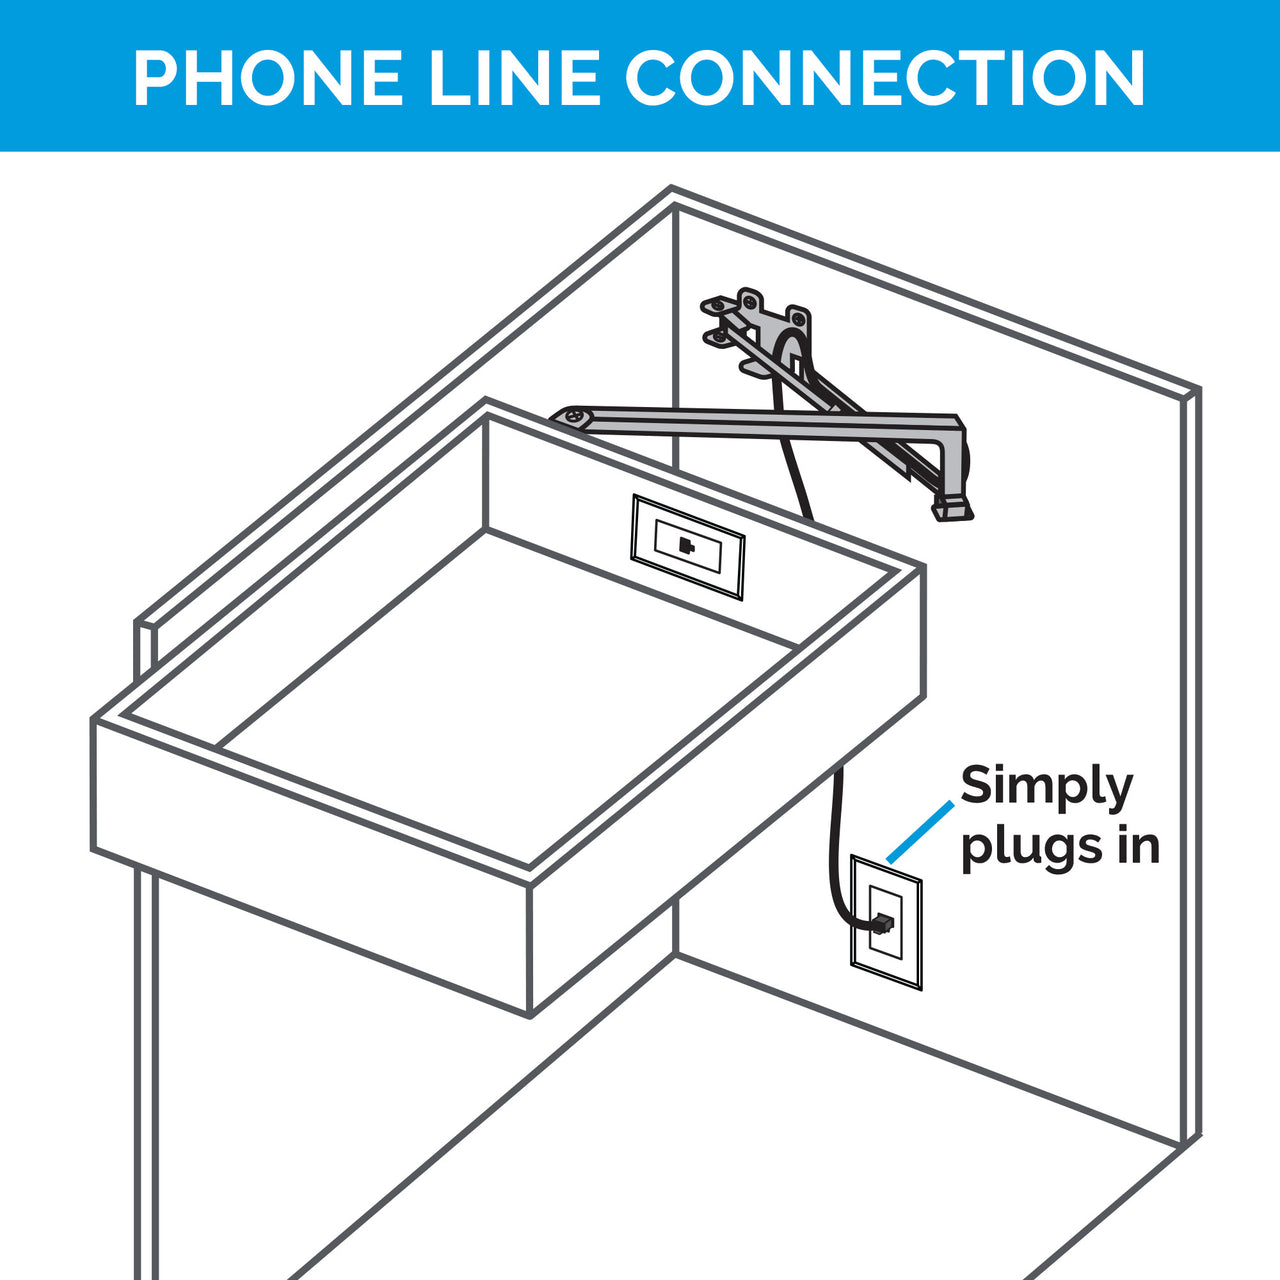 Cable Management Arms and Phone Line Connection